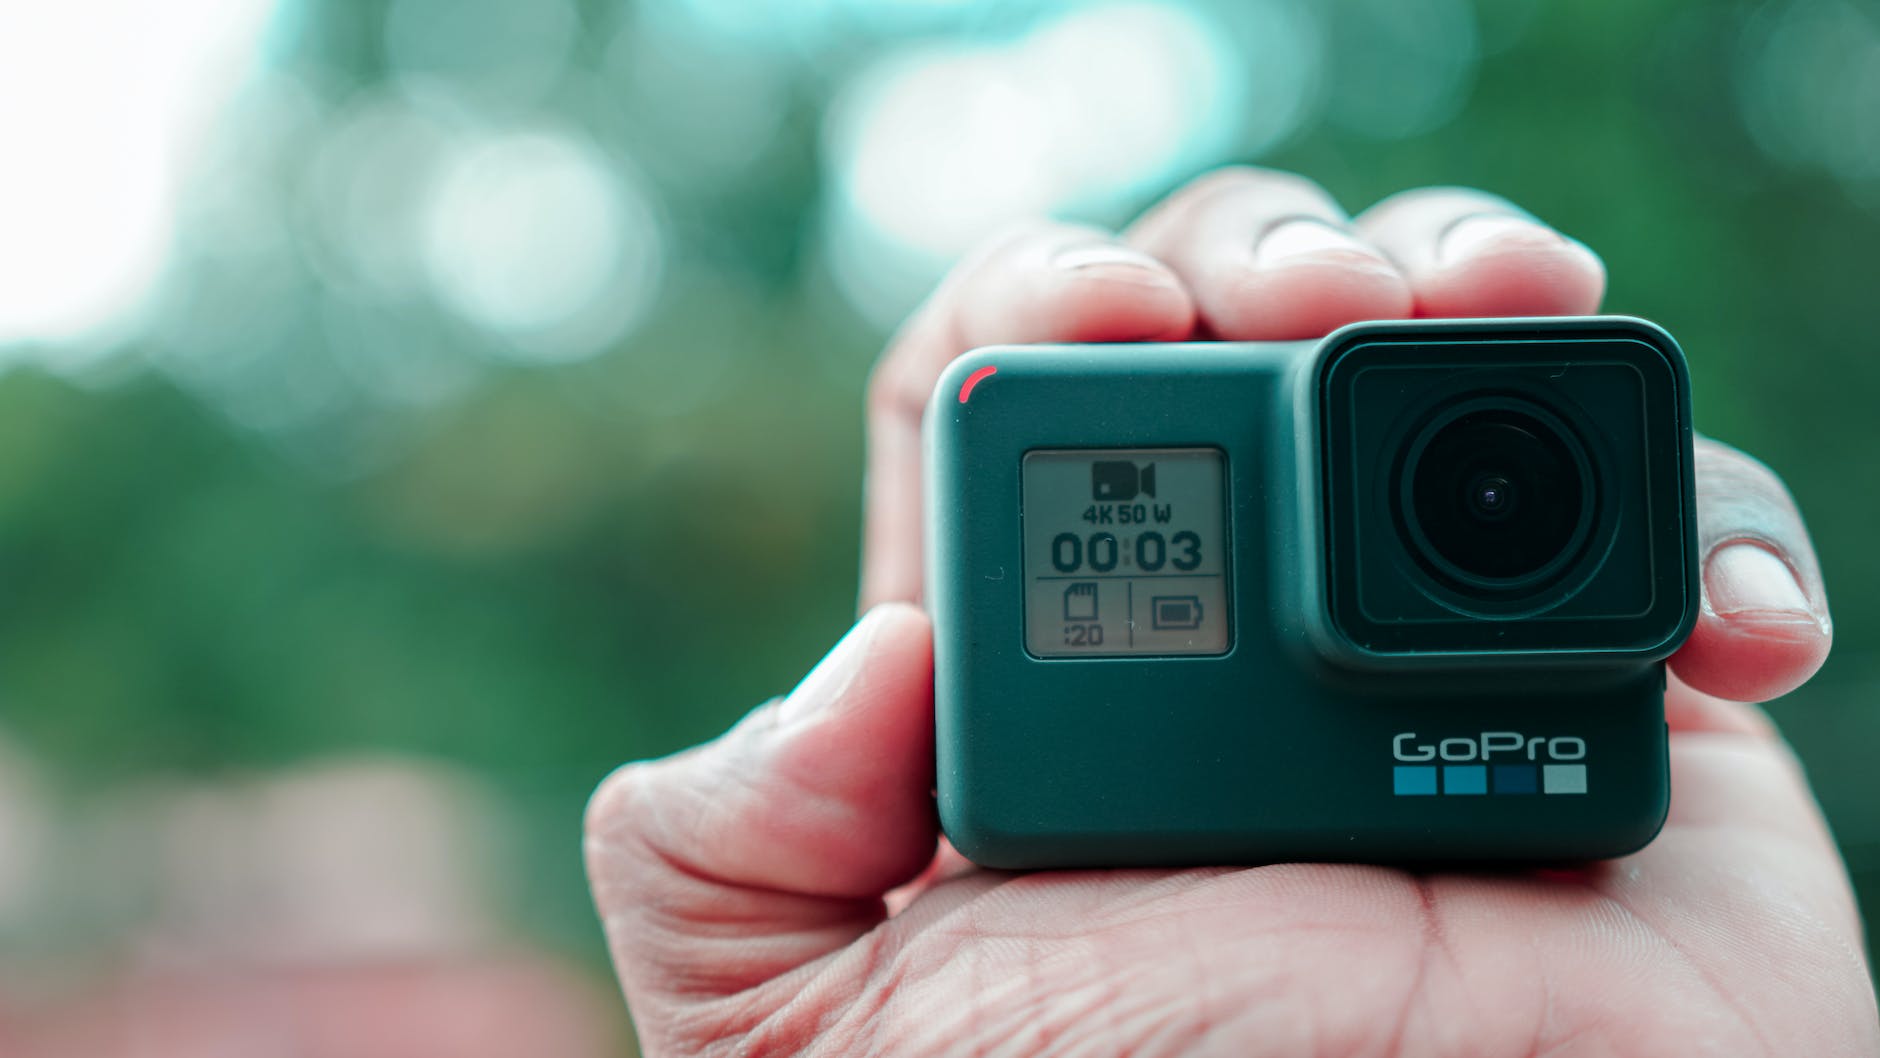 a close up shot of a person holding a gopro camera